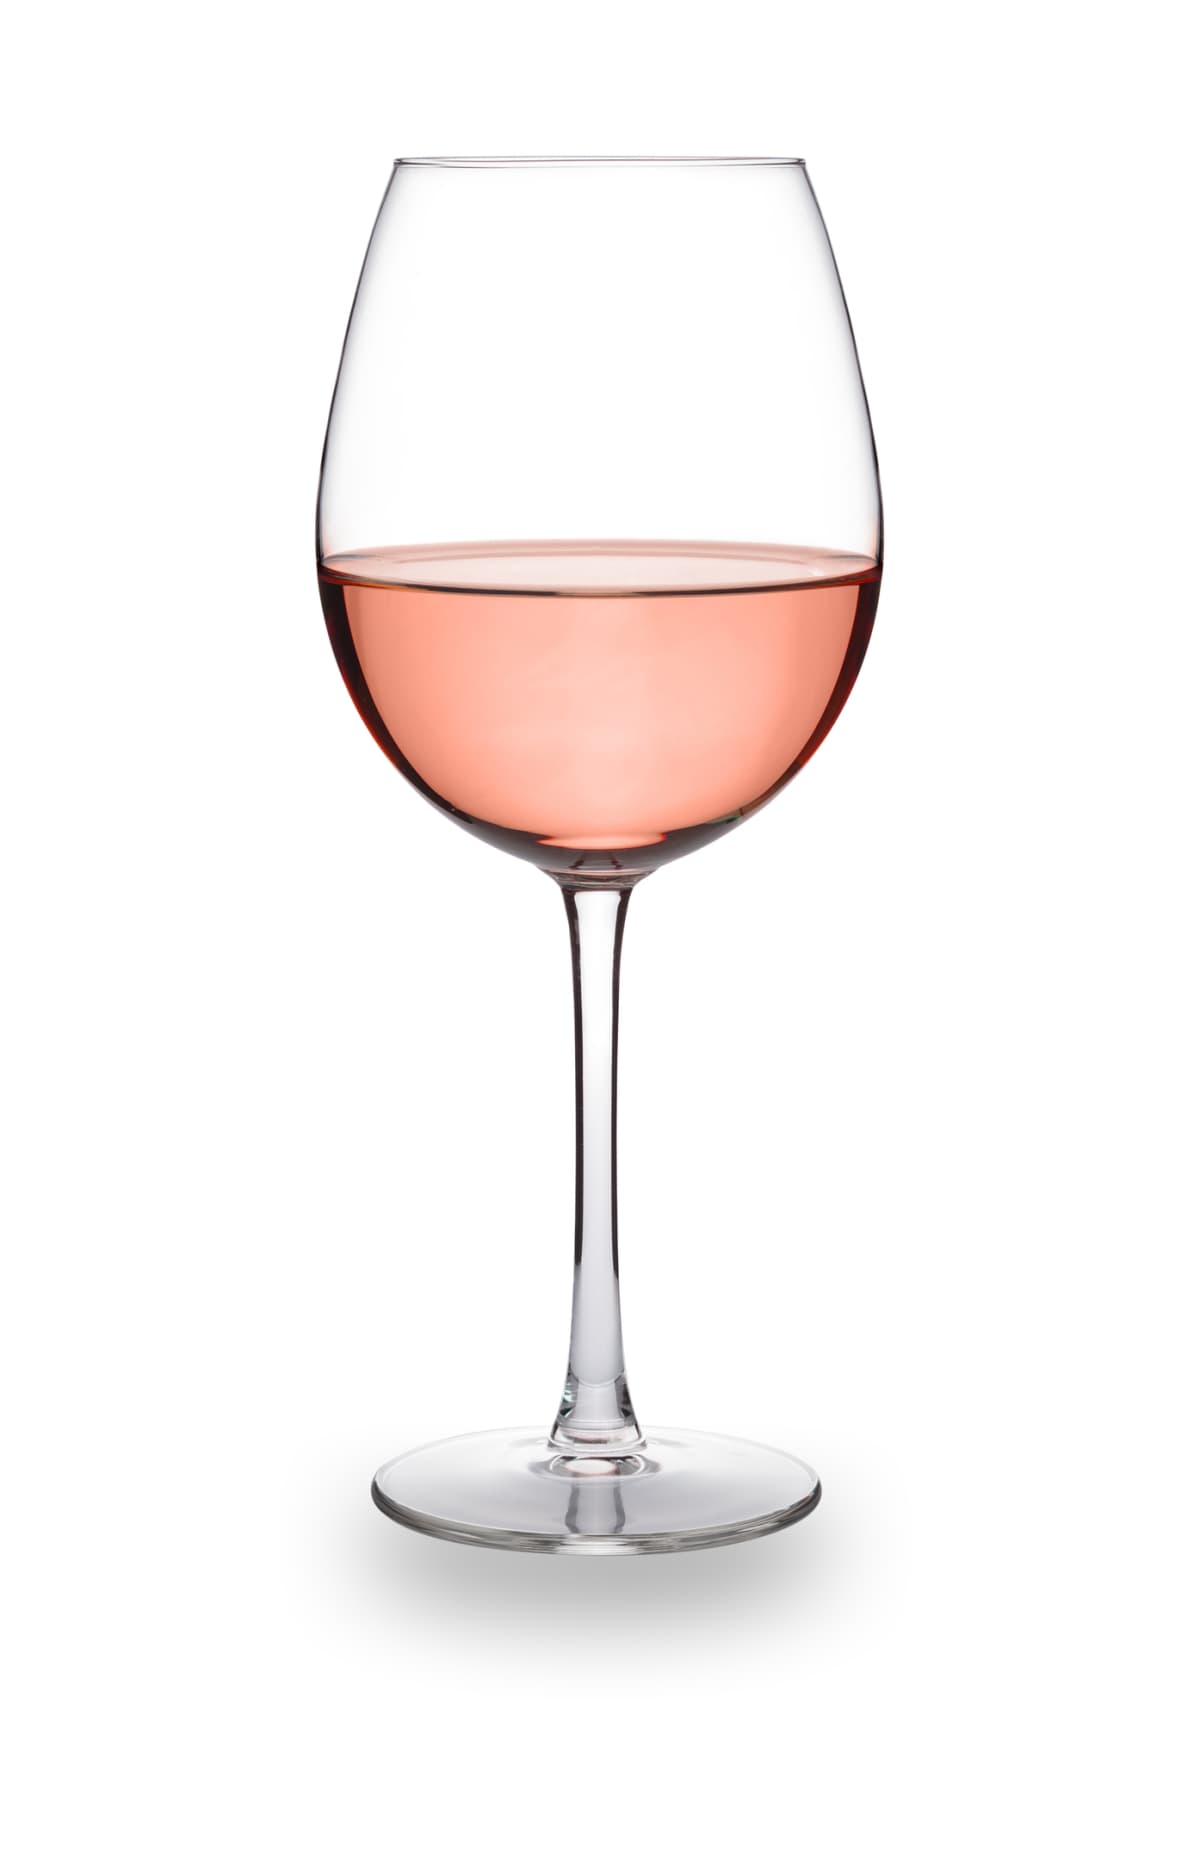 Single elegant glass of rose wine, in bowl style glass, isolated on white with a drop shadow